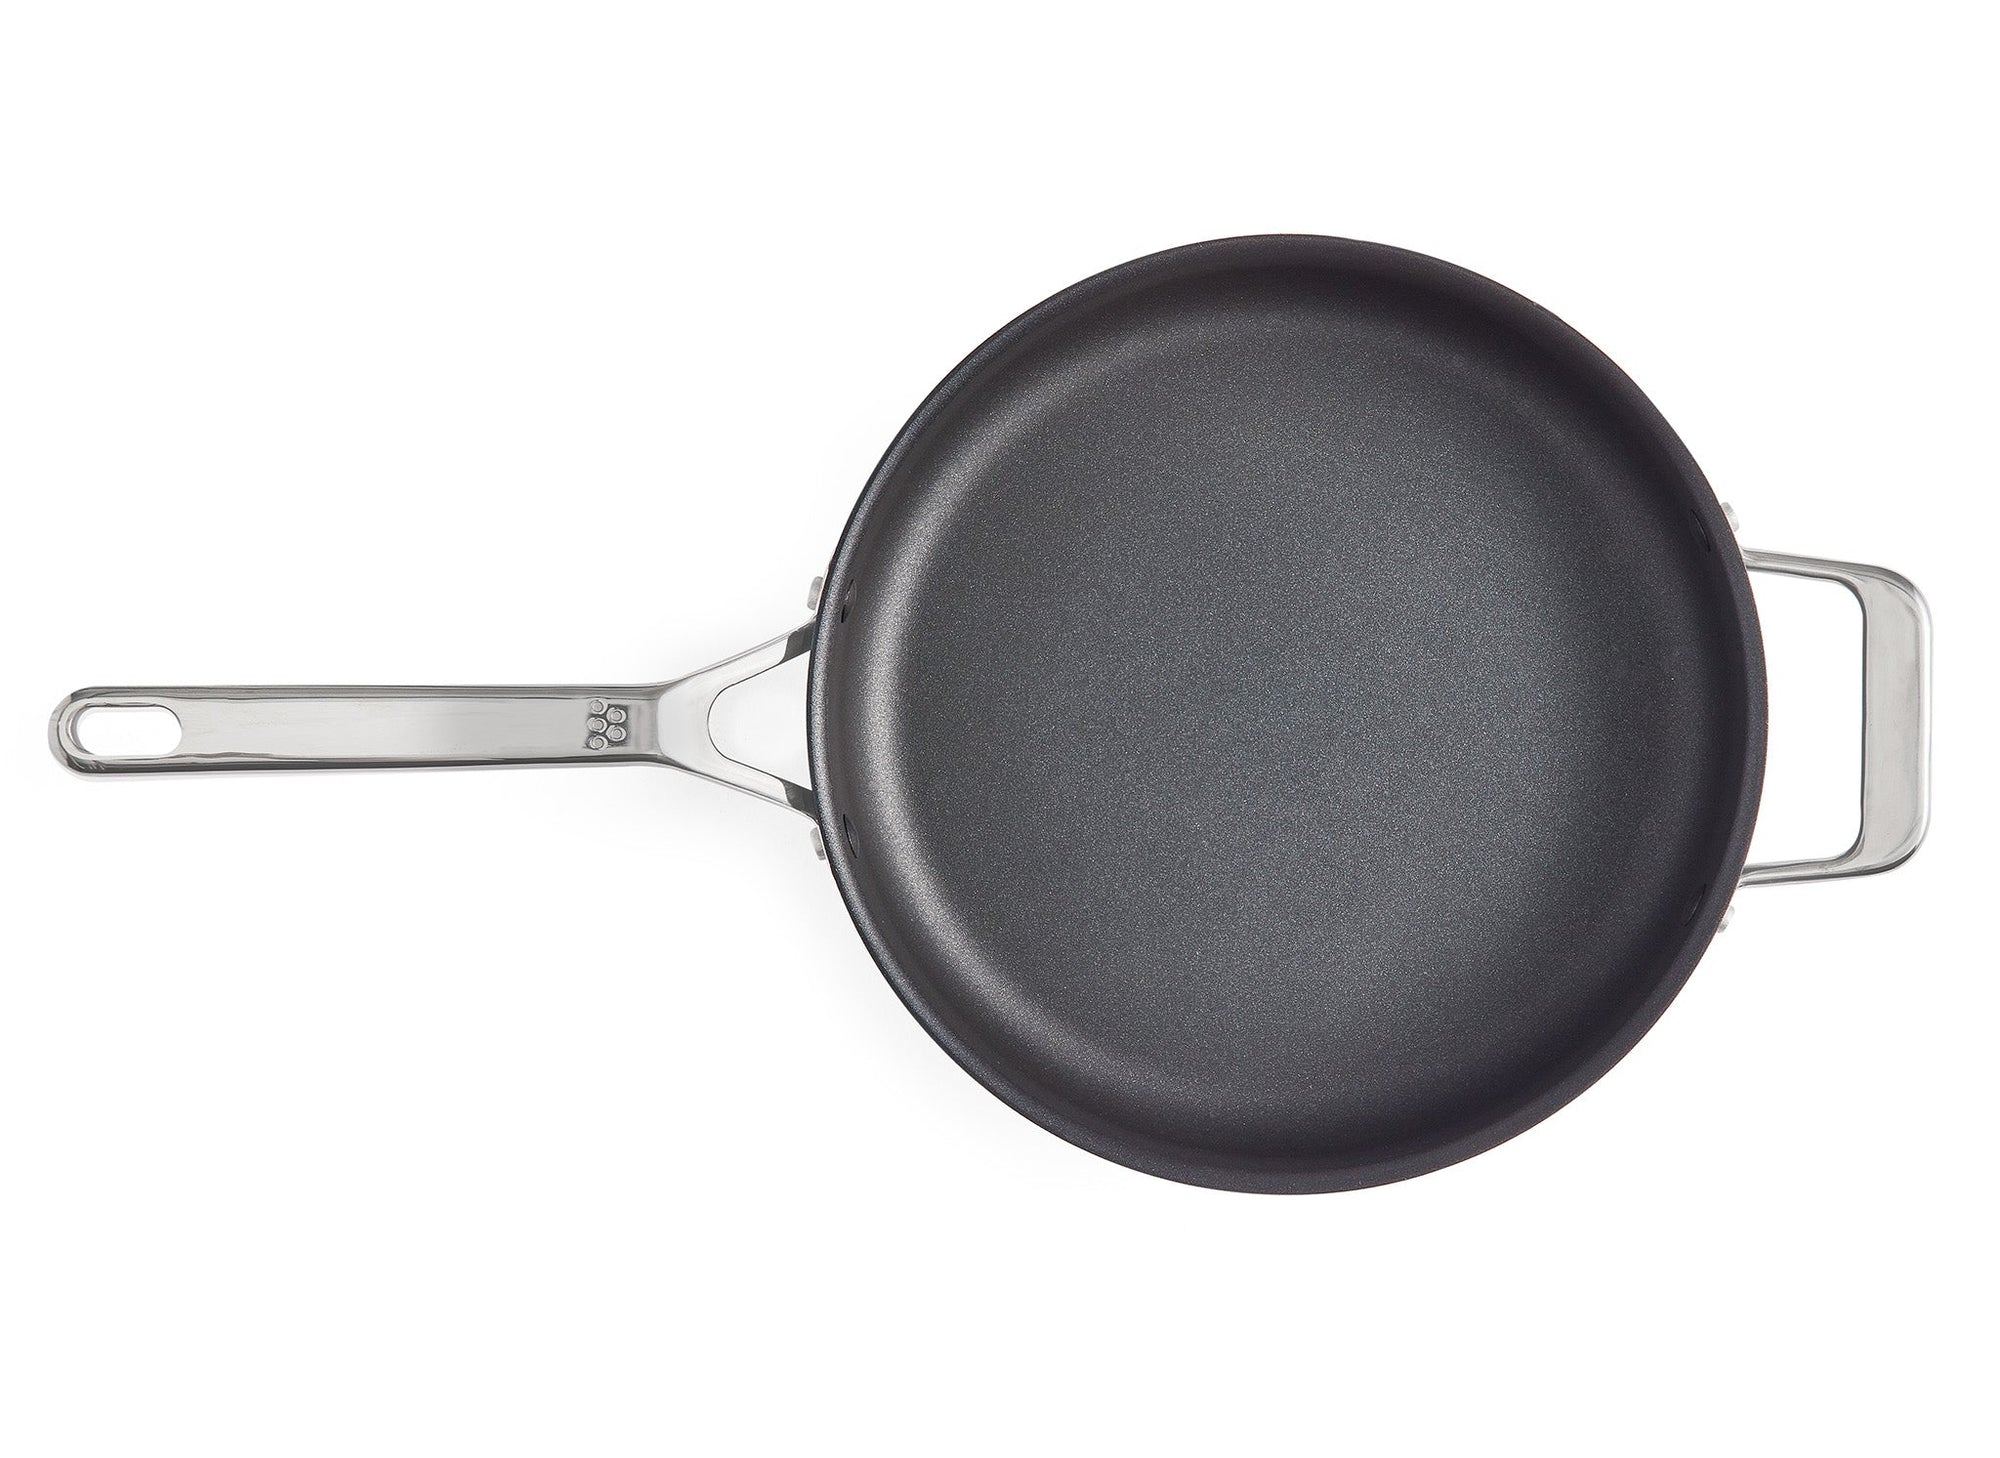 A bird’s eye view of the Misen 3 QT Nonstick Sauté Pan, with lid off, on a white background.